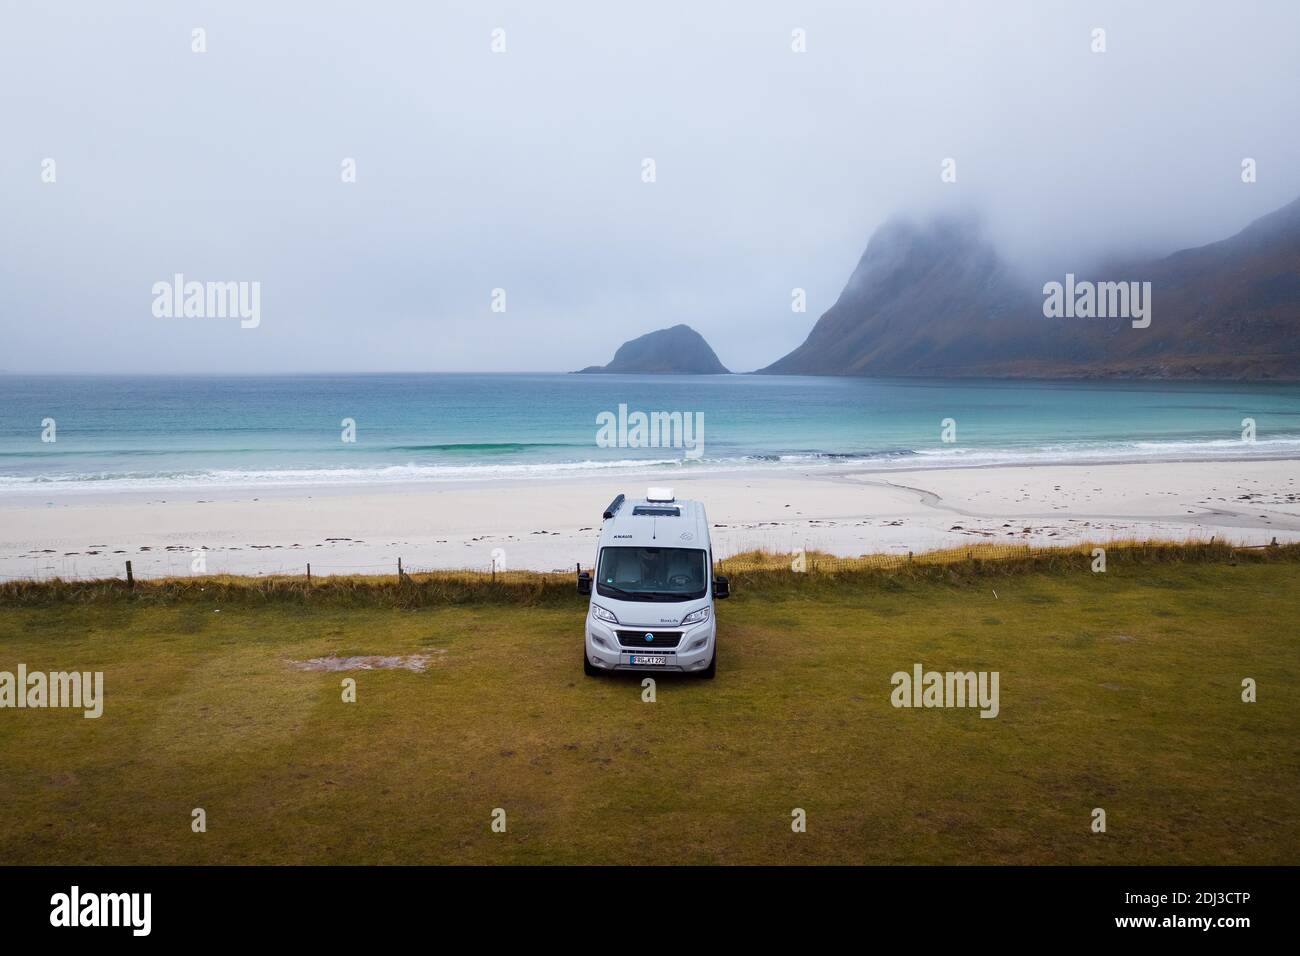 Drone shot, camping van on grass in front of a fine sandy beach, Haukland beach, Lofoten, Norway Stock Photo